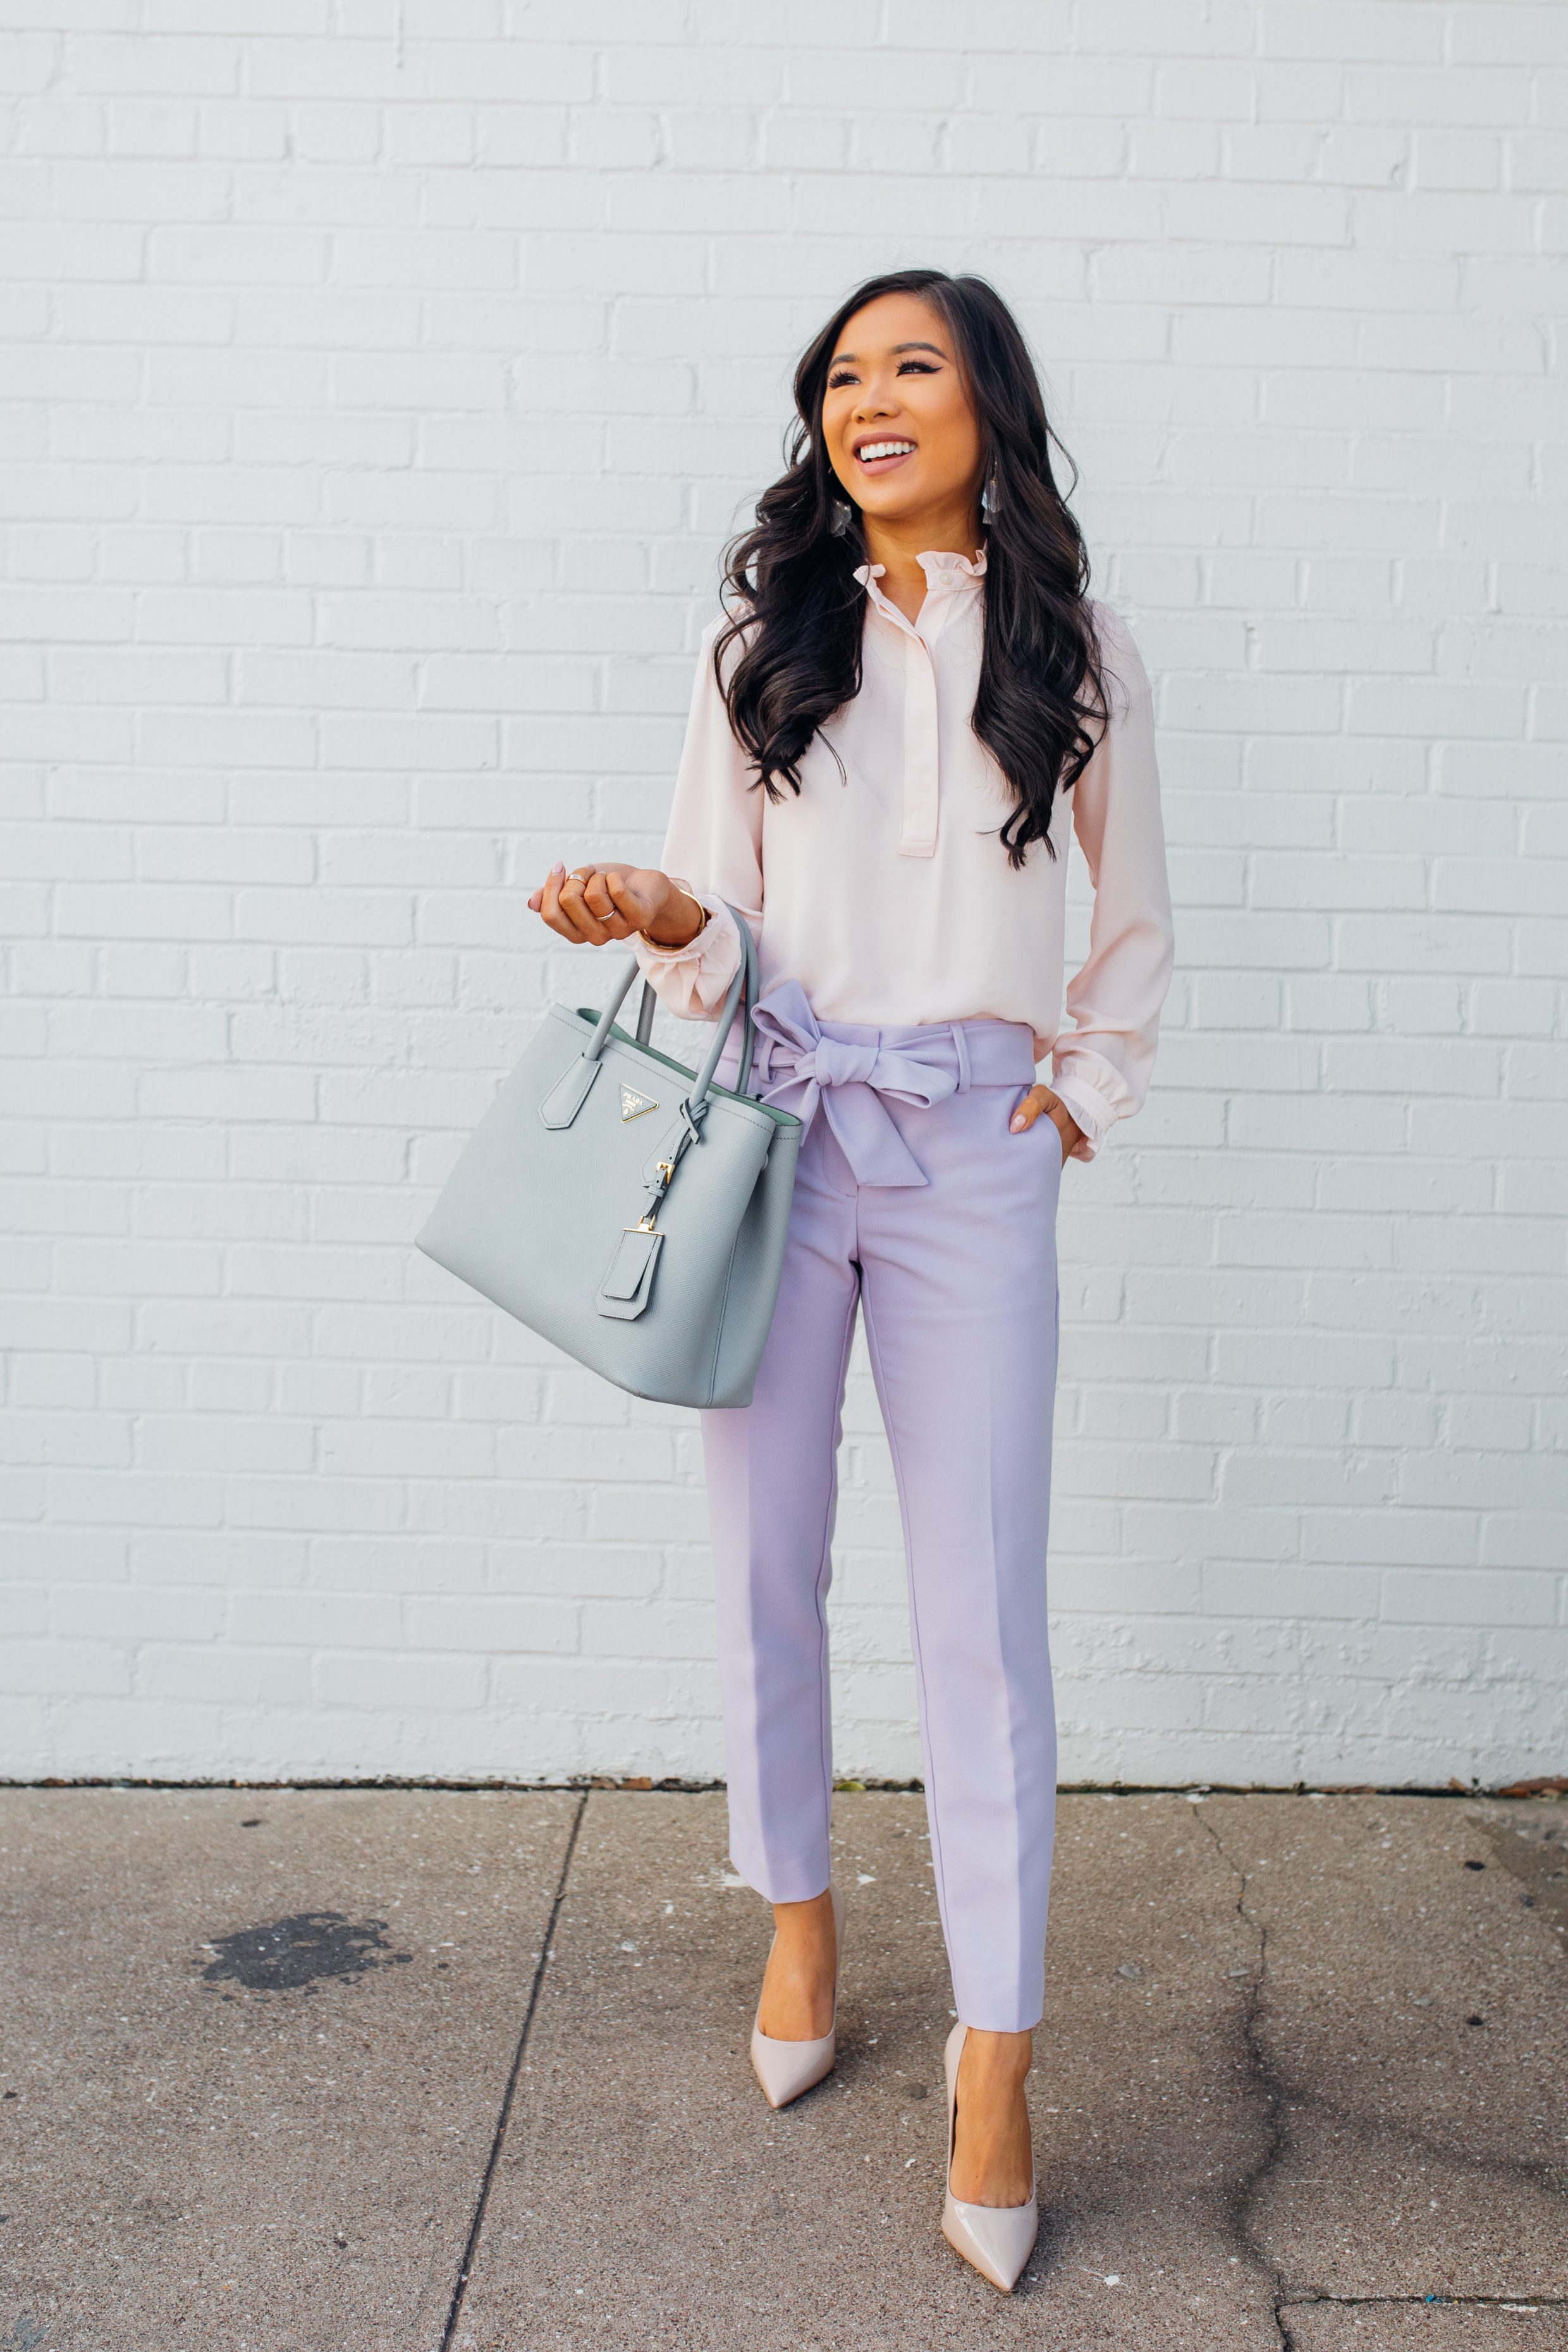 LOFT Tie-waist pants in crystal violet with a blush henley and M. Gemi Cammeo heels